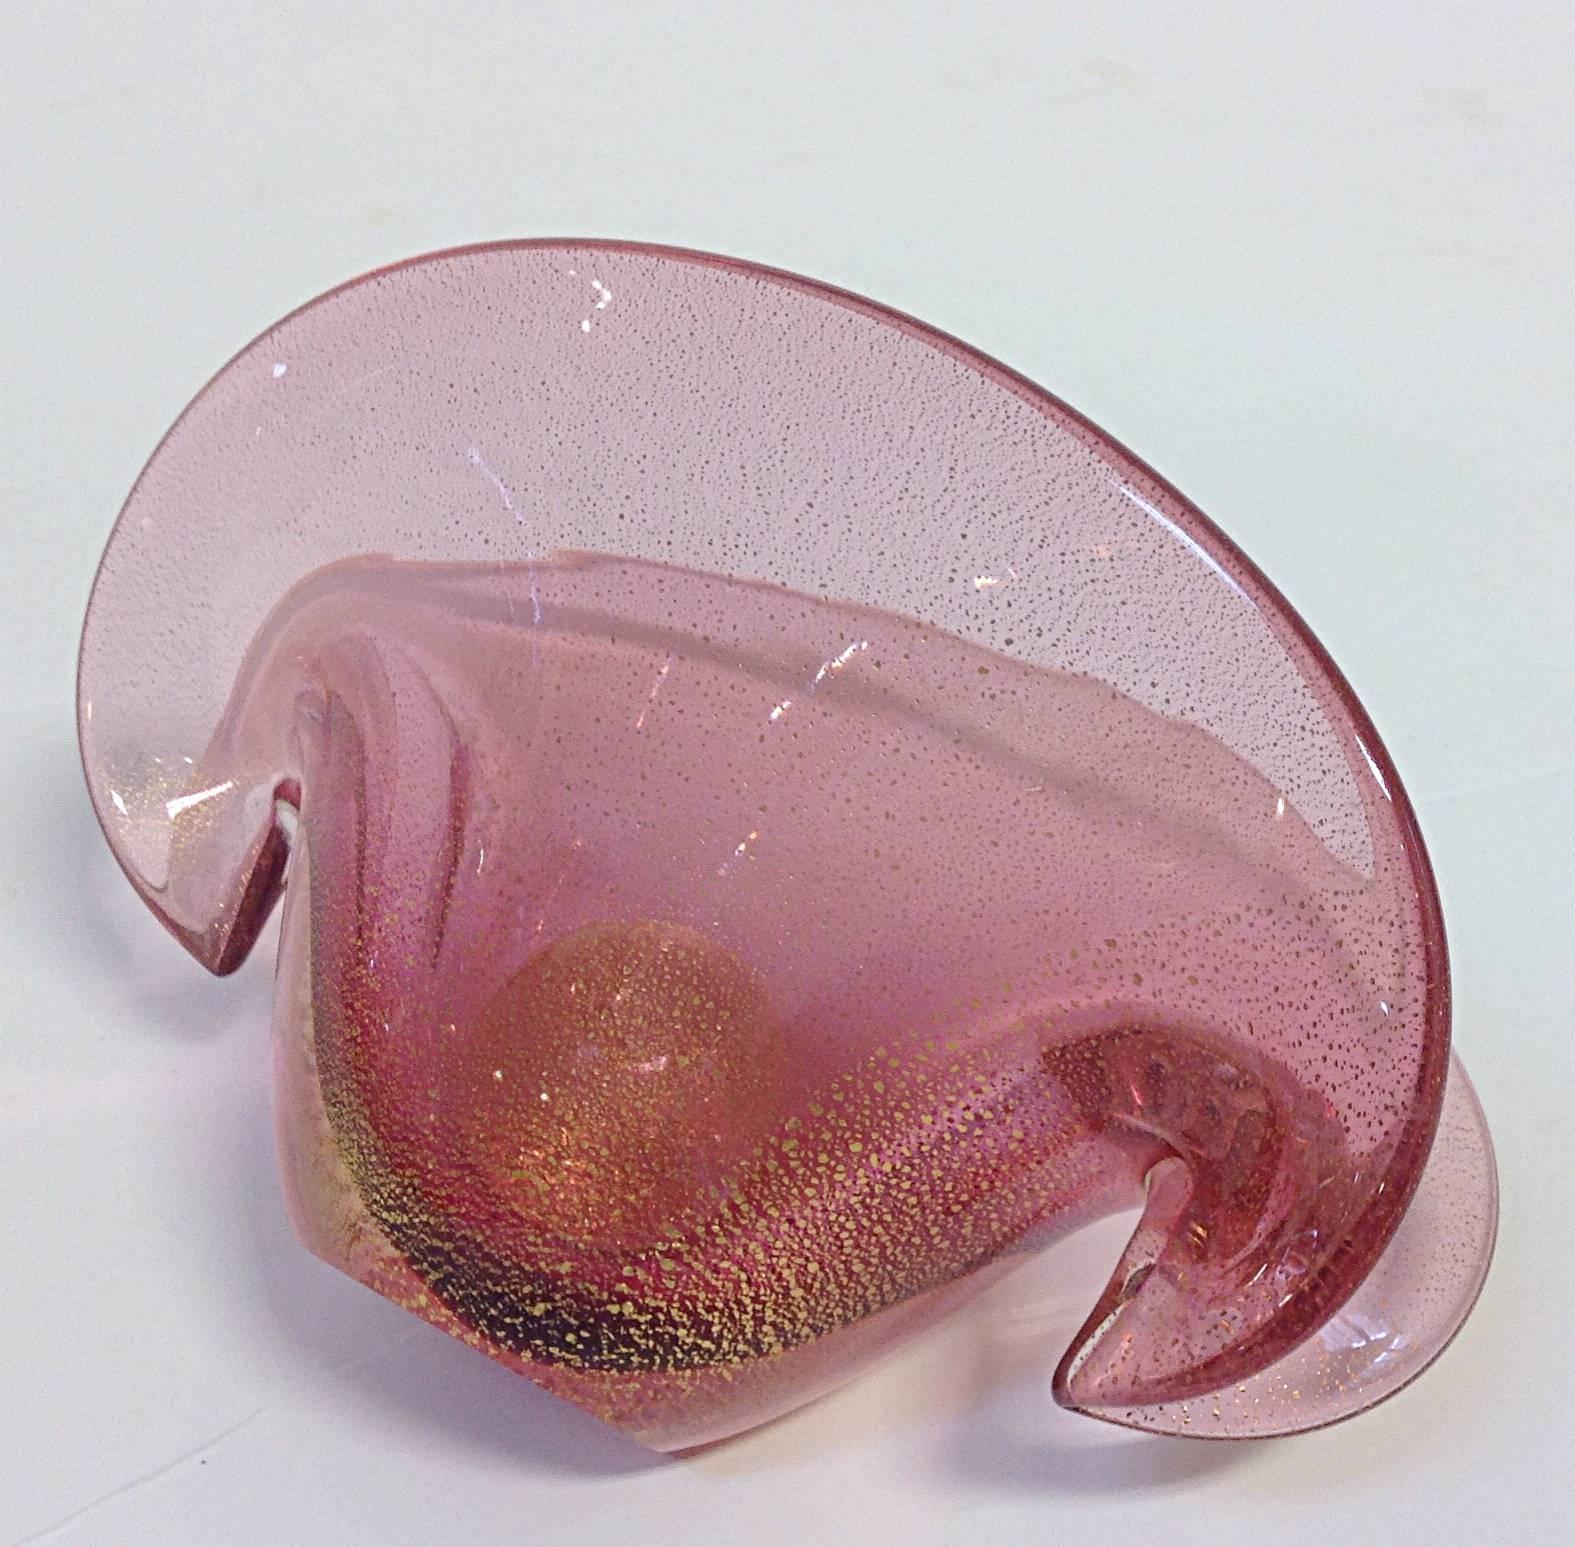 Exquisite Murano blown glass table decoration in the form of open mollusk with pearl. Shell is in pink glass with gold flecks and pearl is clear glass with gold flecks. Can be displayed either vertical or on its side. Graceful curves and even